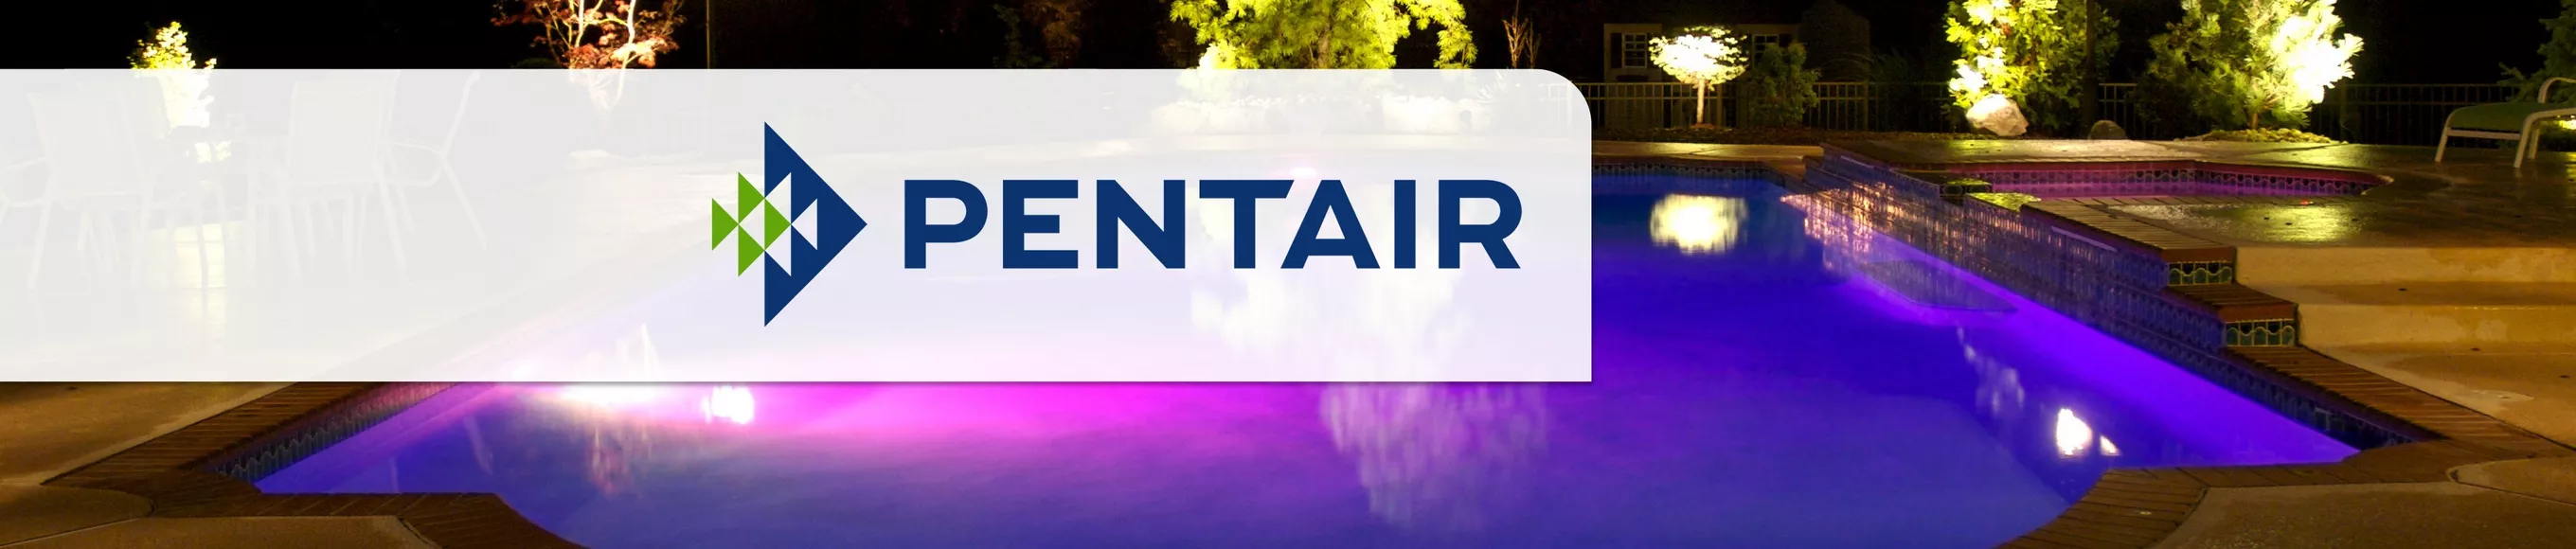 Pentair Featured Products